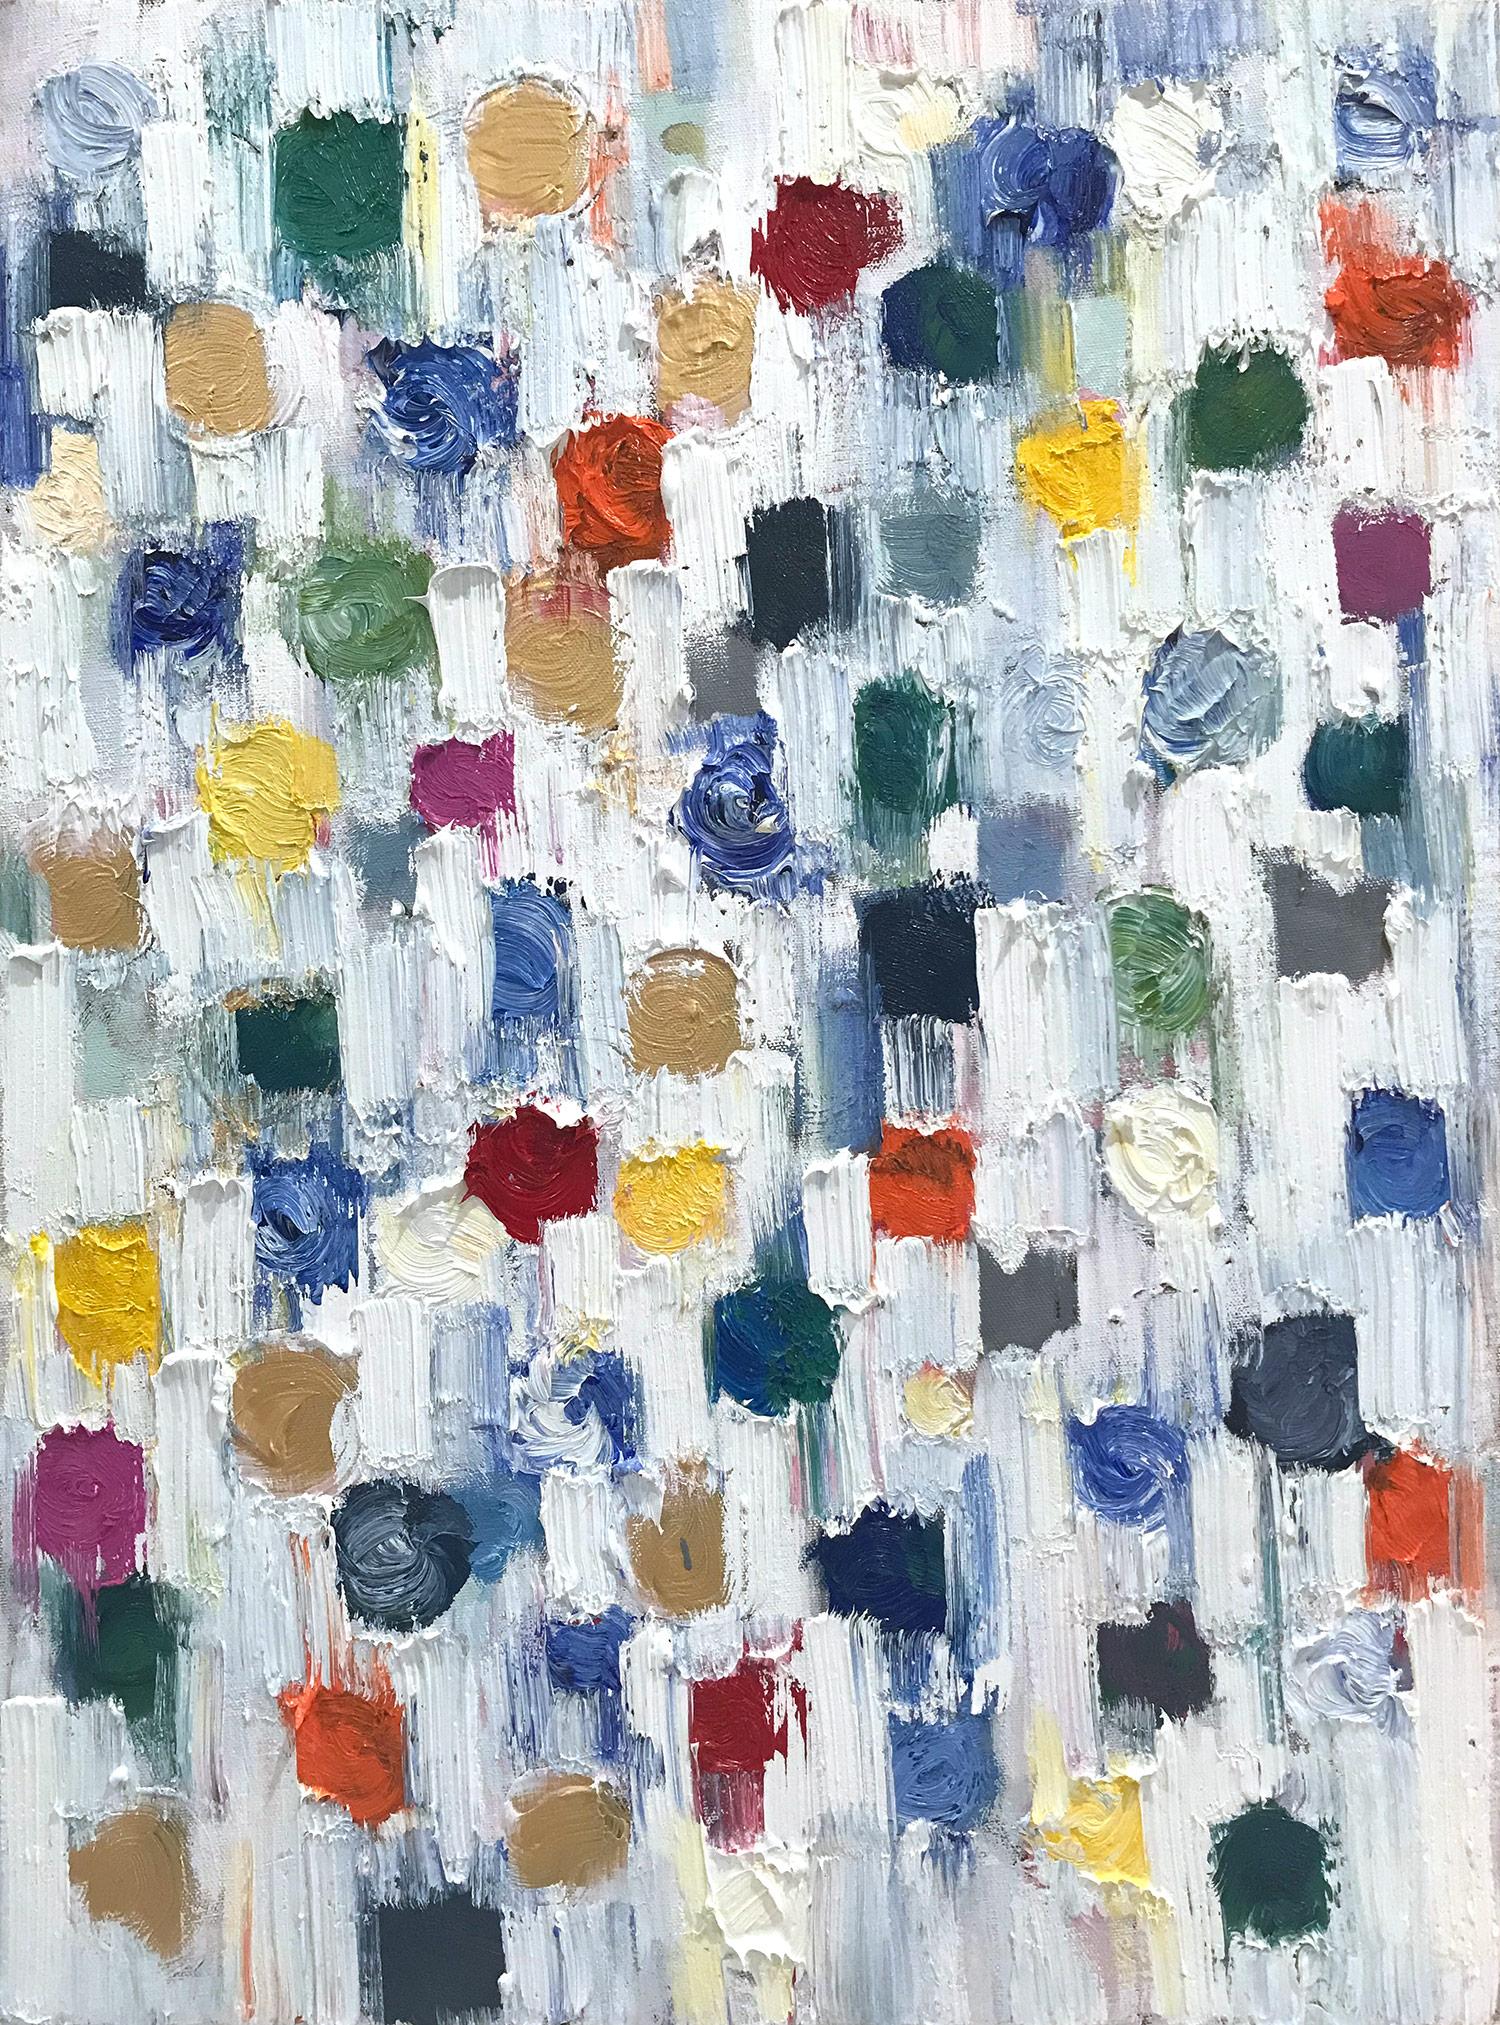 "Dripping Dots - Capri" Colorful Abstract Oil Painting on Canvas